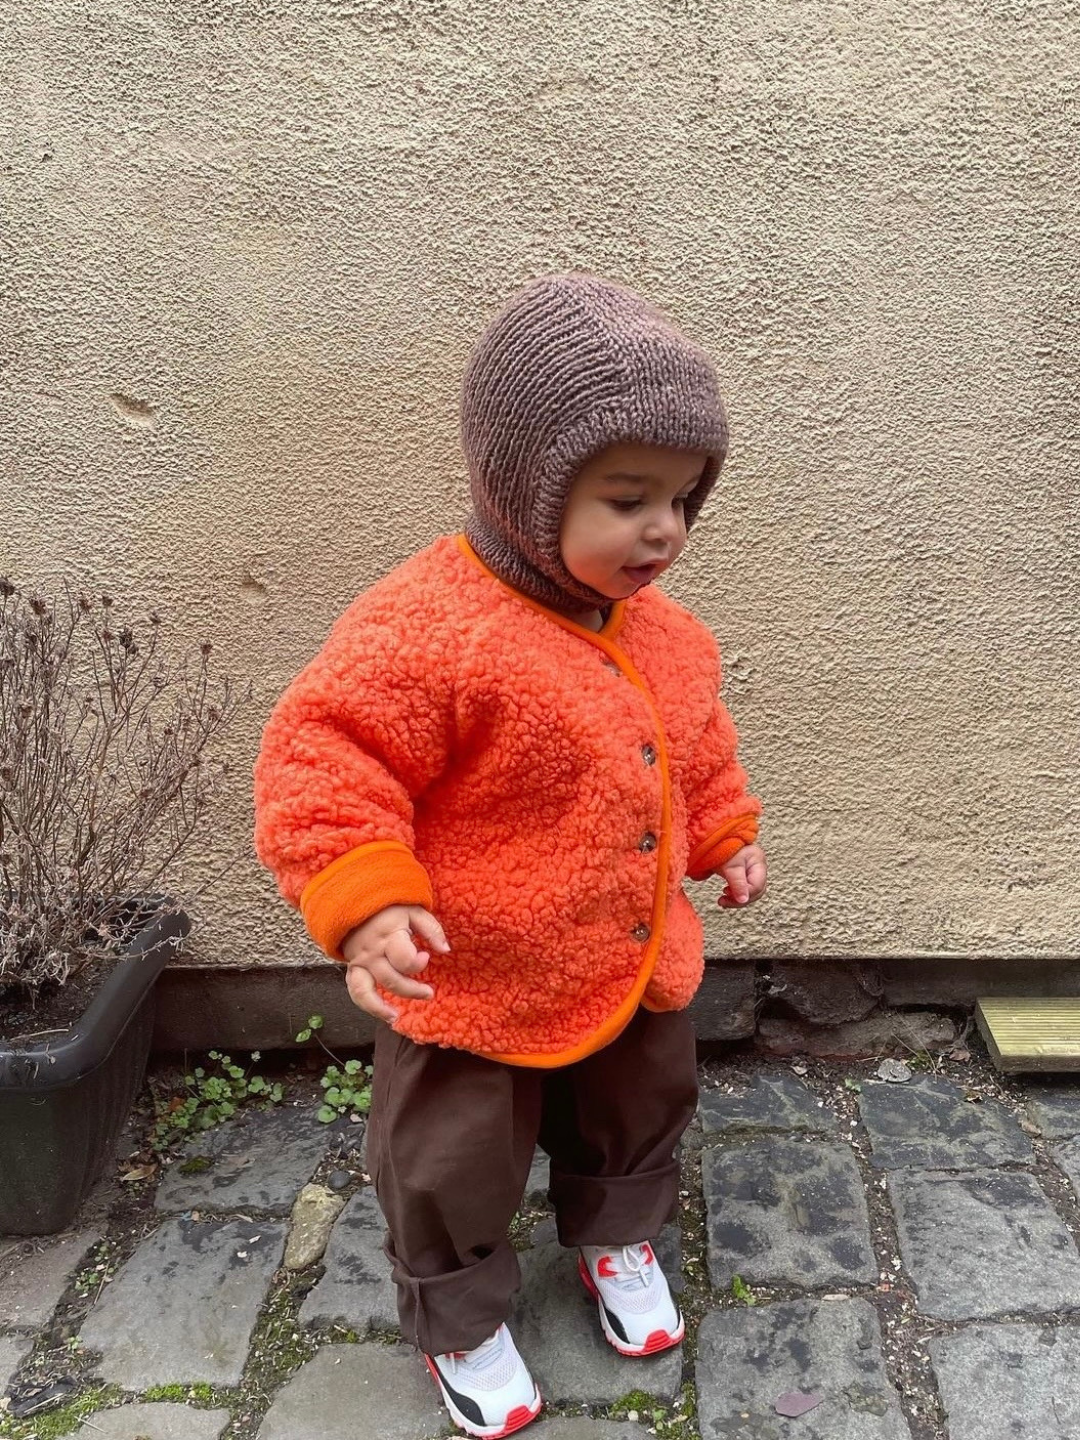 Tangerine | A toddler wearing an orange collarless fleece jacket with four brown buttons, with a brown hat, brown pants and white sneakers, standing on a paved outdoor floor, against a beige wall..